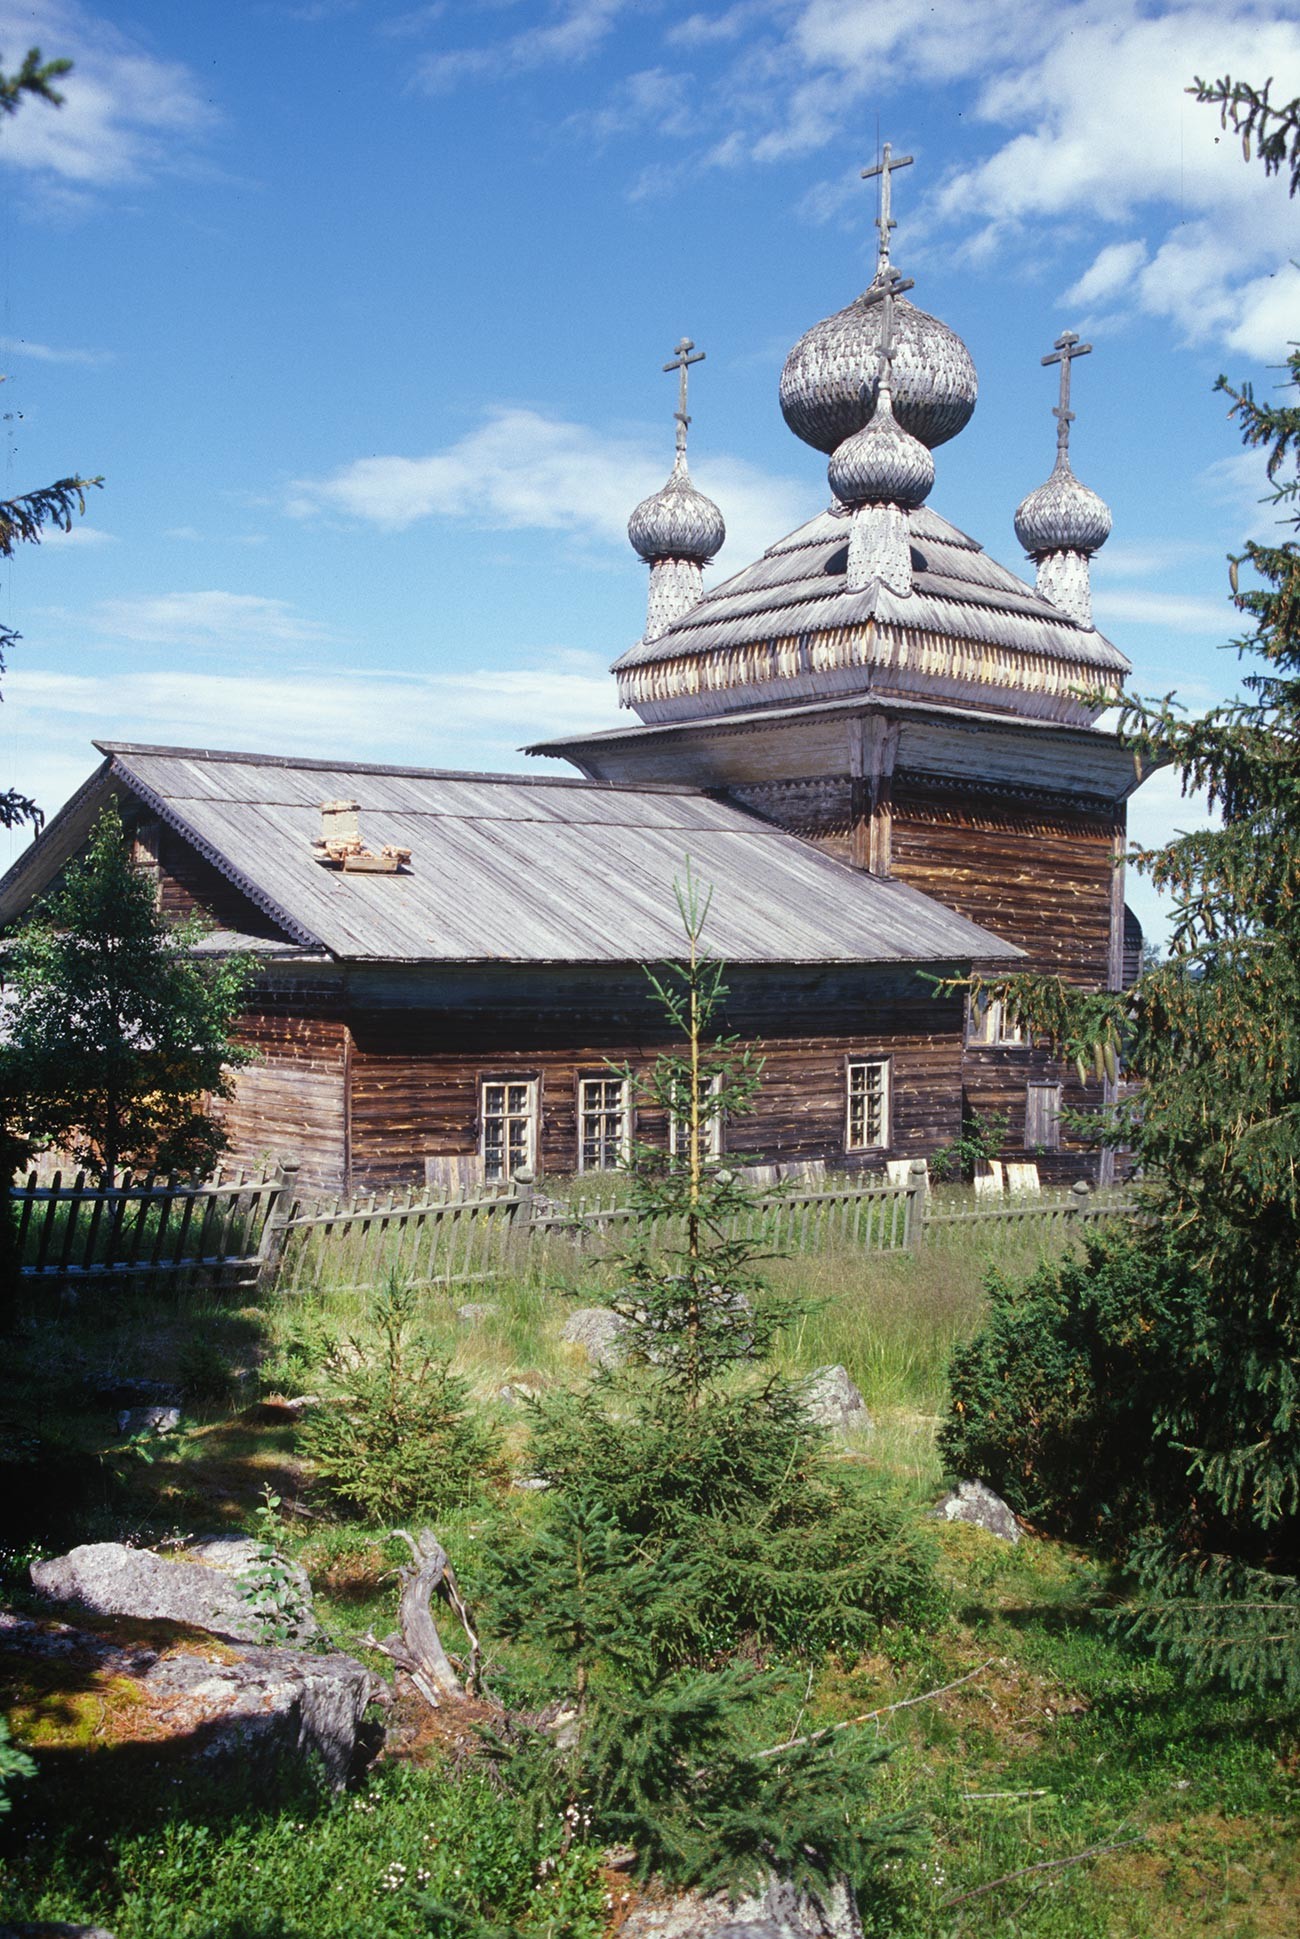 Virma. Church of Sts. Peter & Paul, southwest view. July 7, 2000